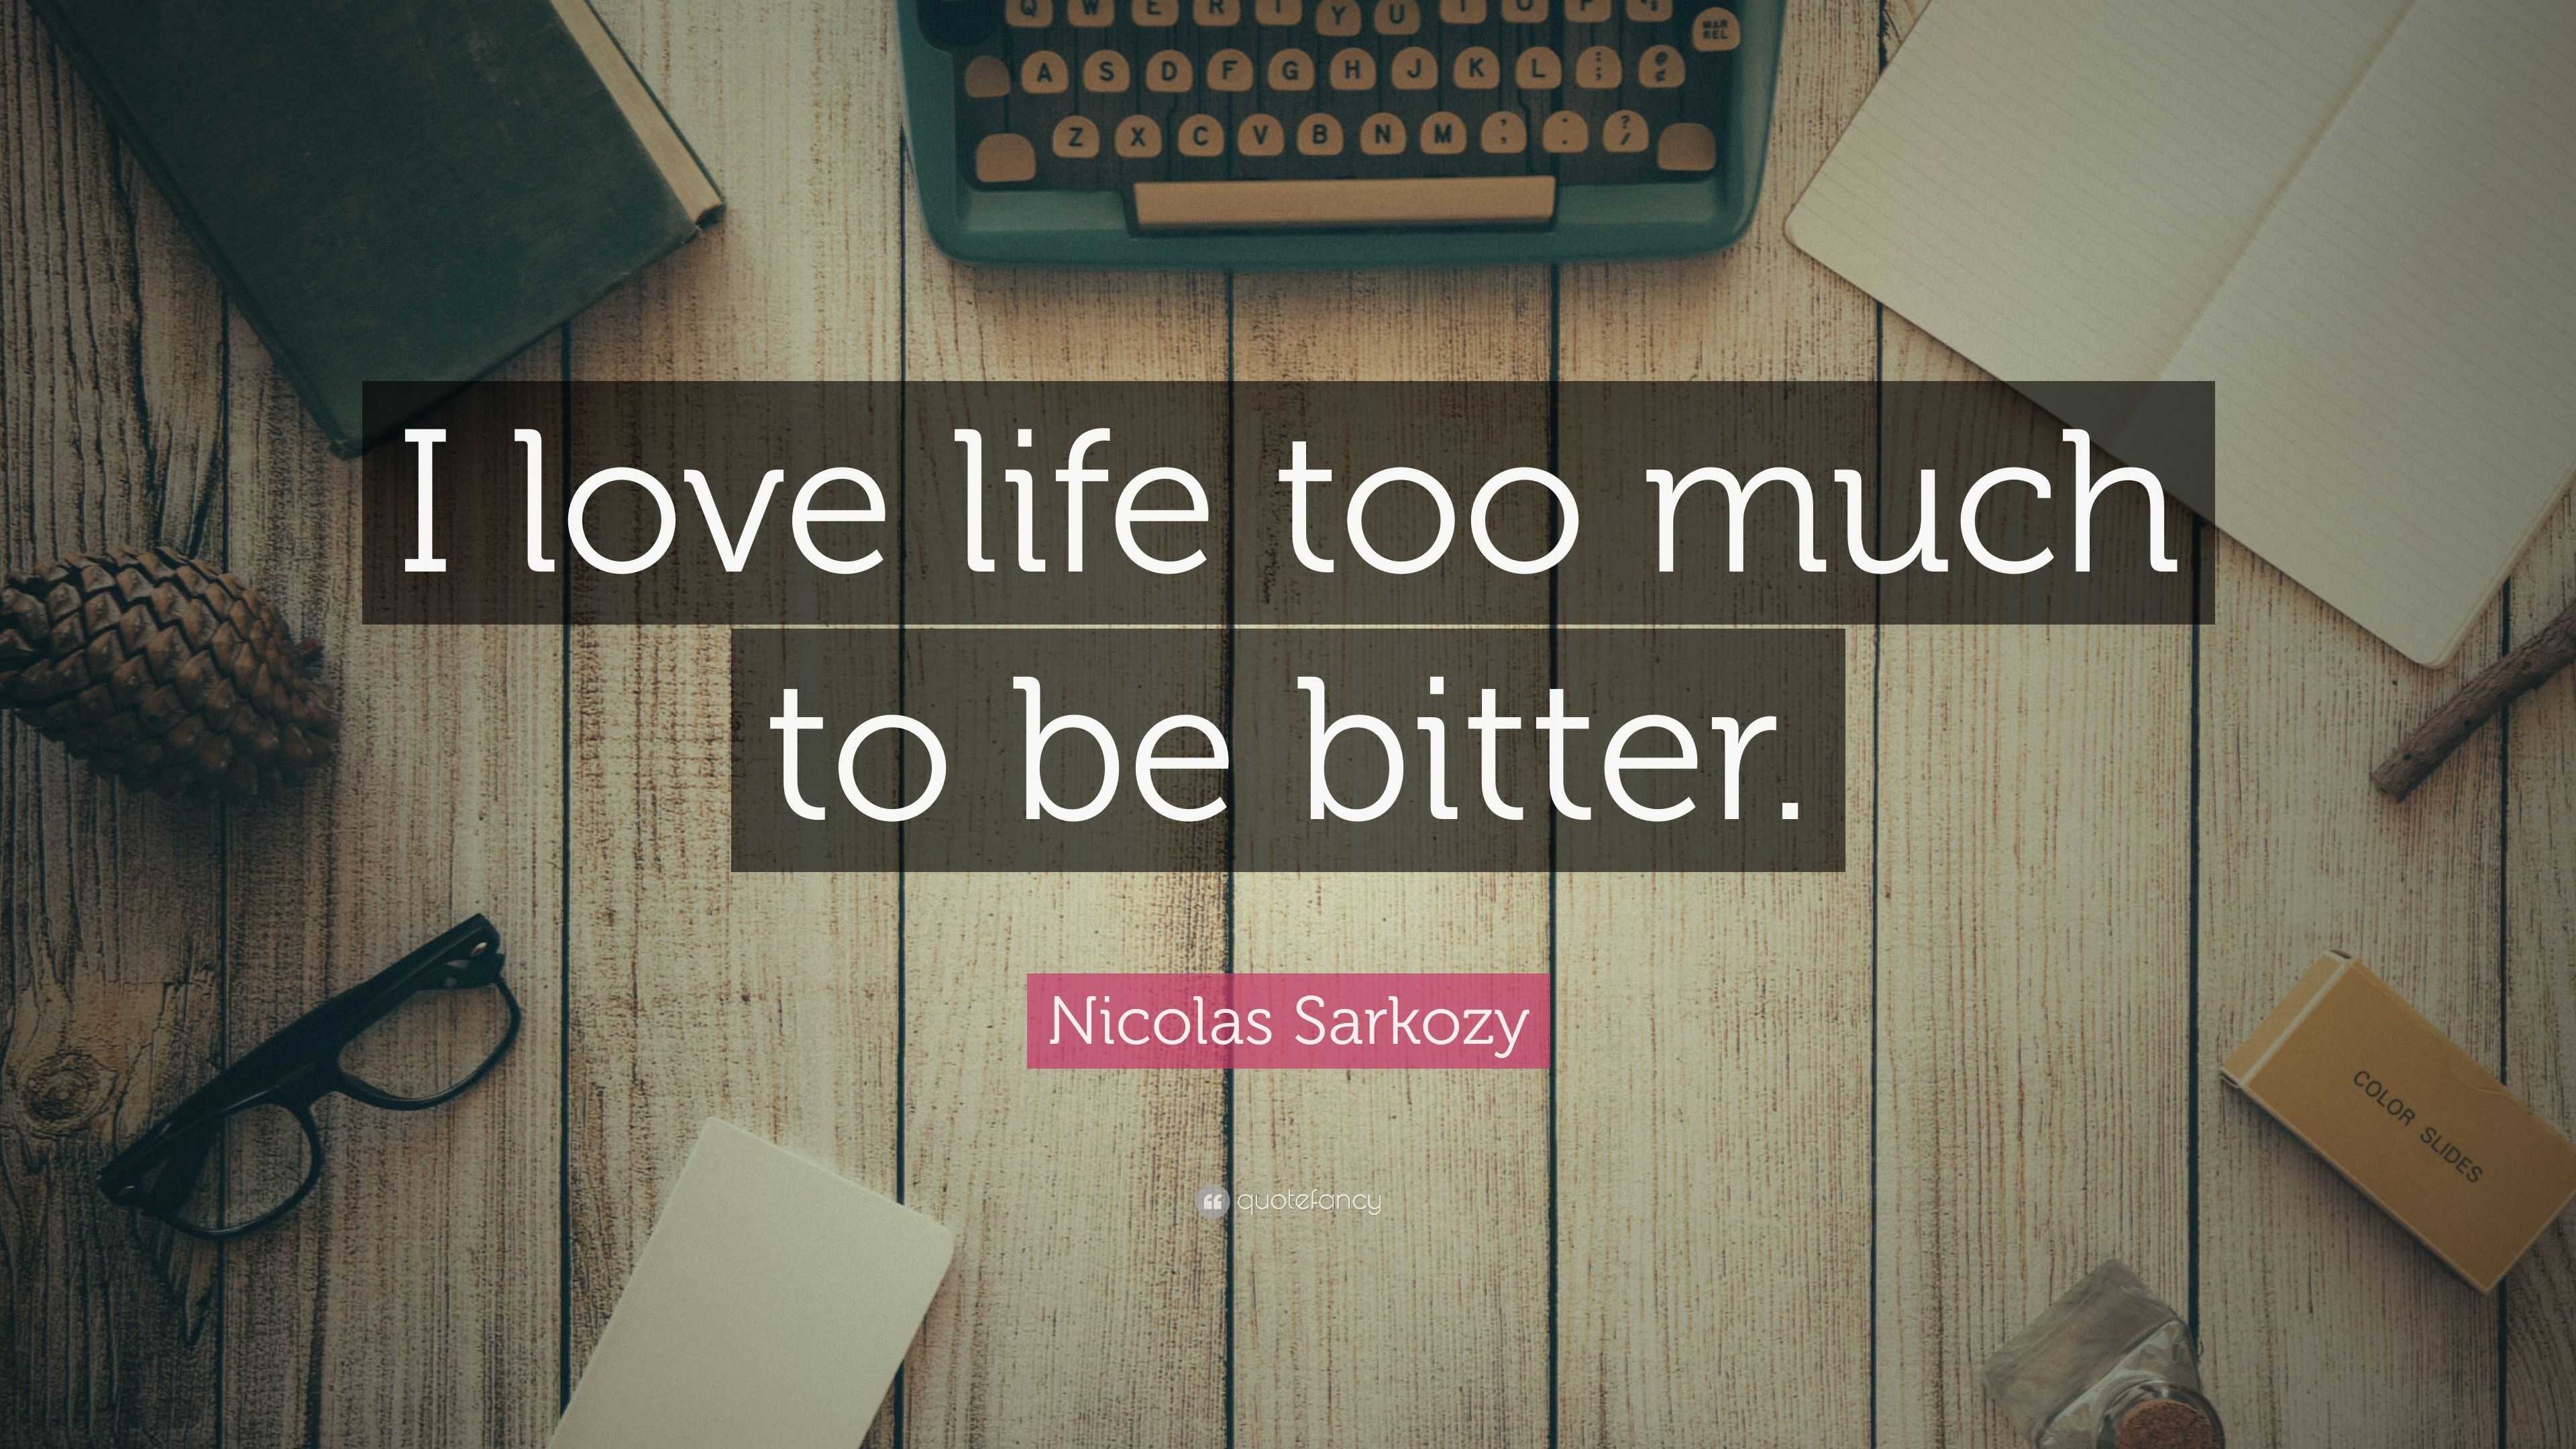 Nicolas Sarkozy Quote “I love life too much to be bitter ”